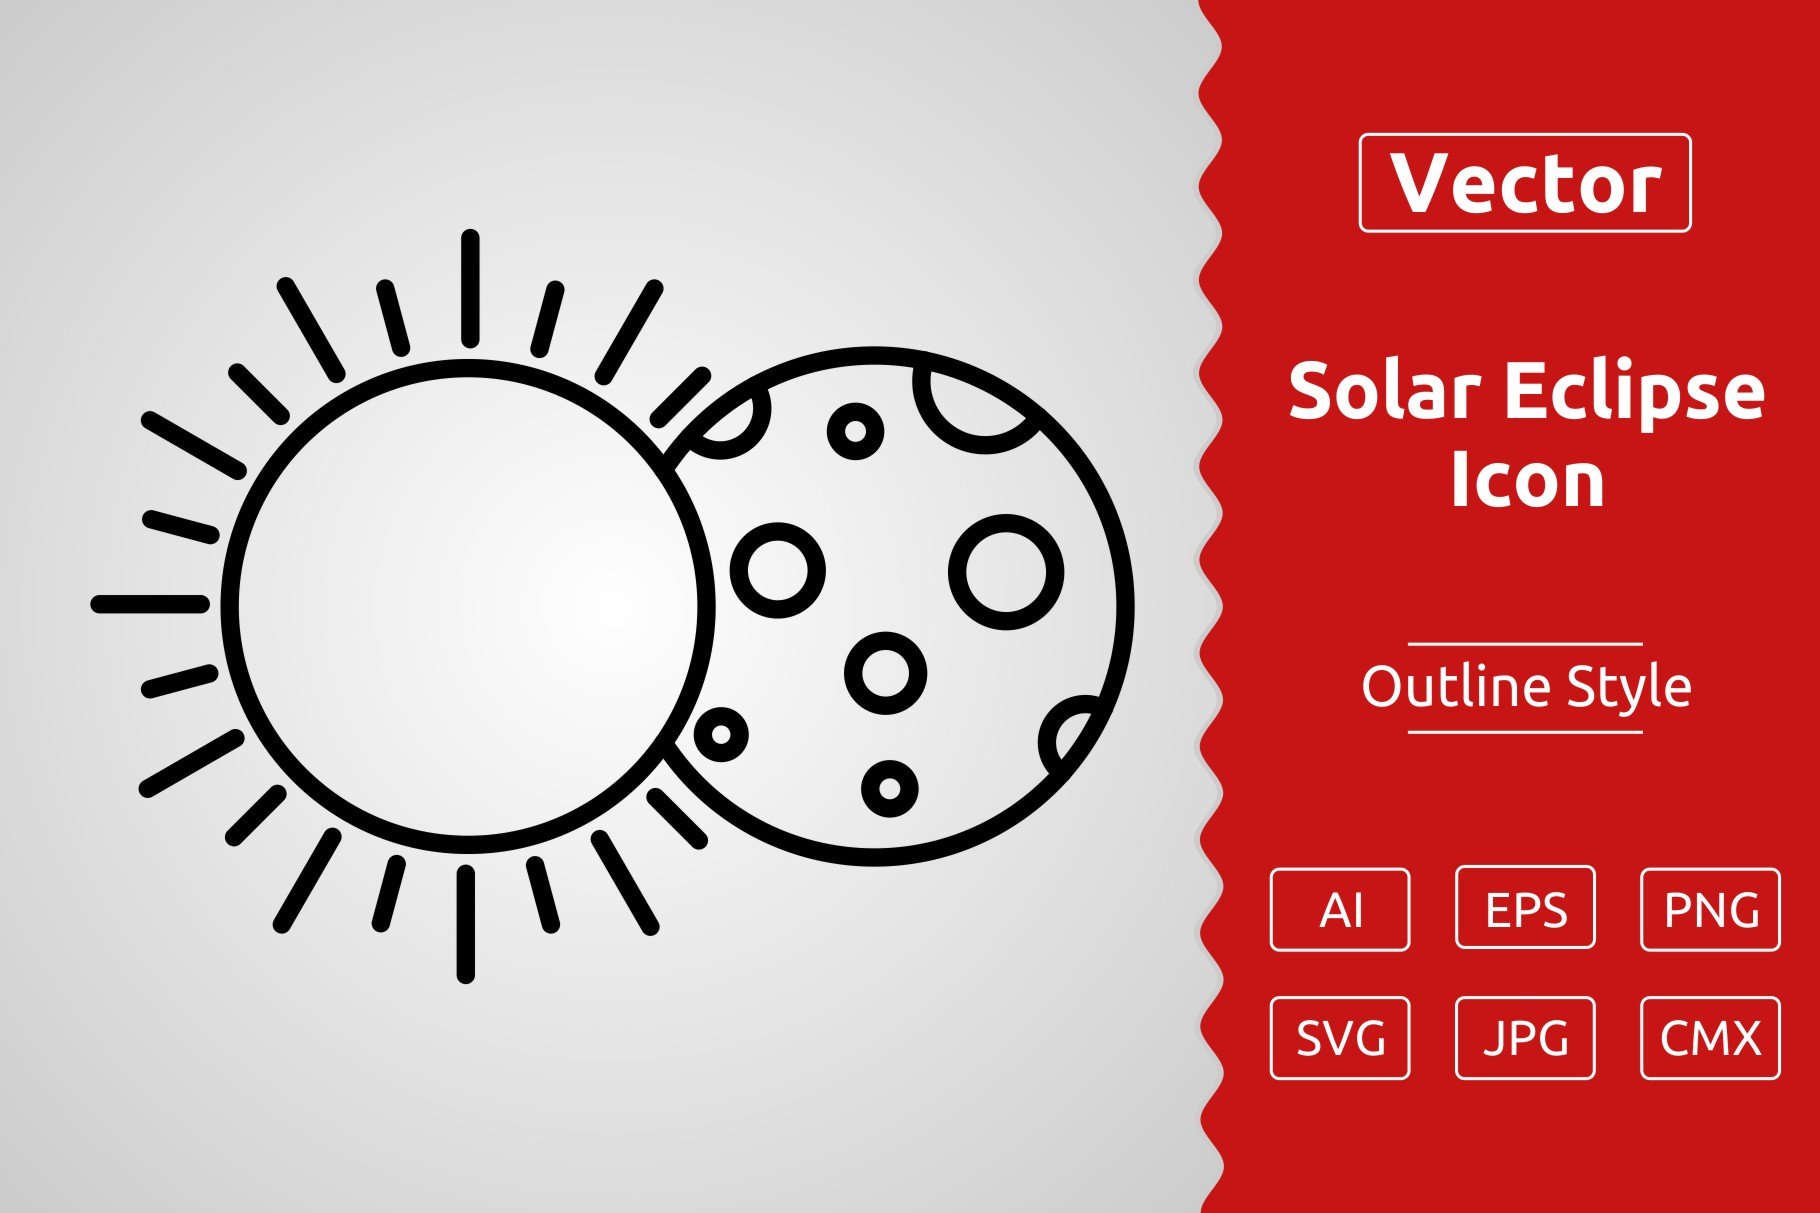 Vector Solar Eclipse Outline Icon cover image.